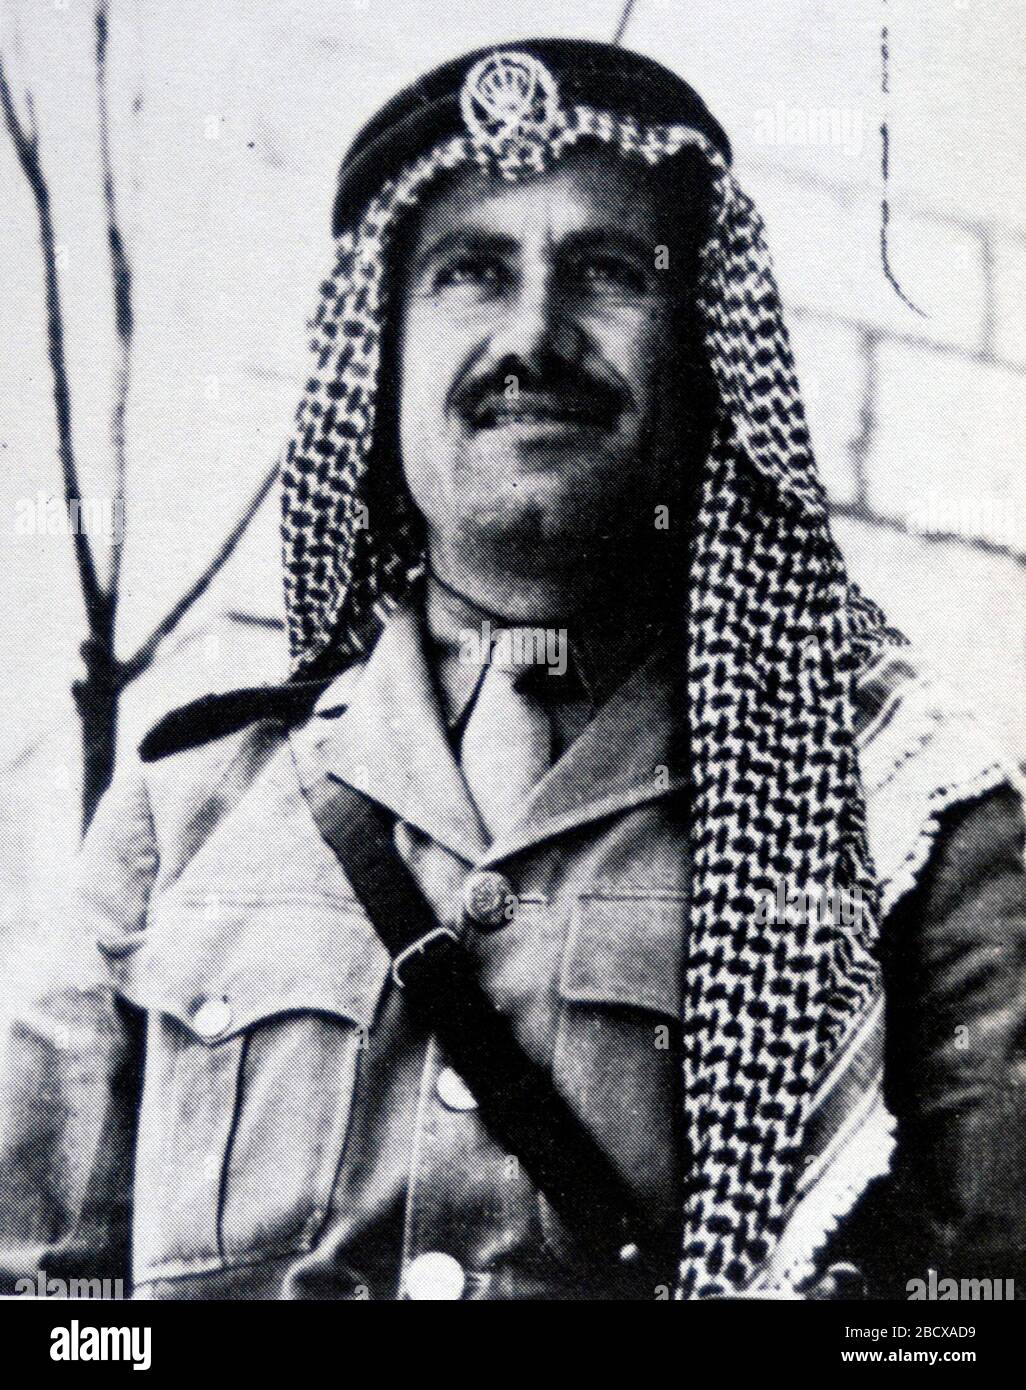 'English: Abdullah Tell, 30, Shaltiel's opponent, was the youngest Arab major in Glubb Pasha's Arab Legion. The son of a landowning family in Transjordan, he dreamed of undoing the injustice of partition. When Old Jerusalem was about to fall to Shaltiel's men, King Abdullah ordered him to go save Jerusalem.; 1948; Collins/Lapierre. O Jerusalem. Page 397.; Hanna Safieh; ' Stock Photo